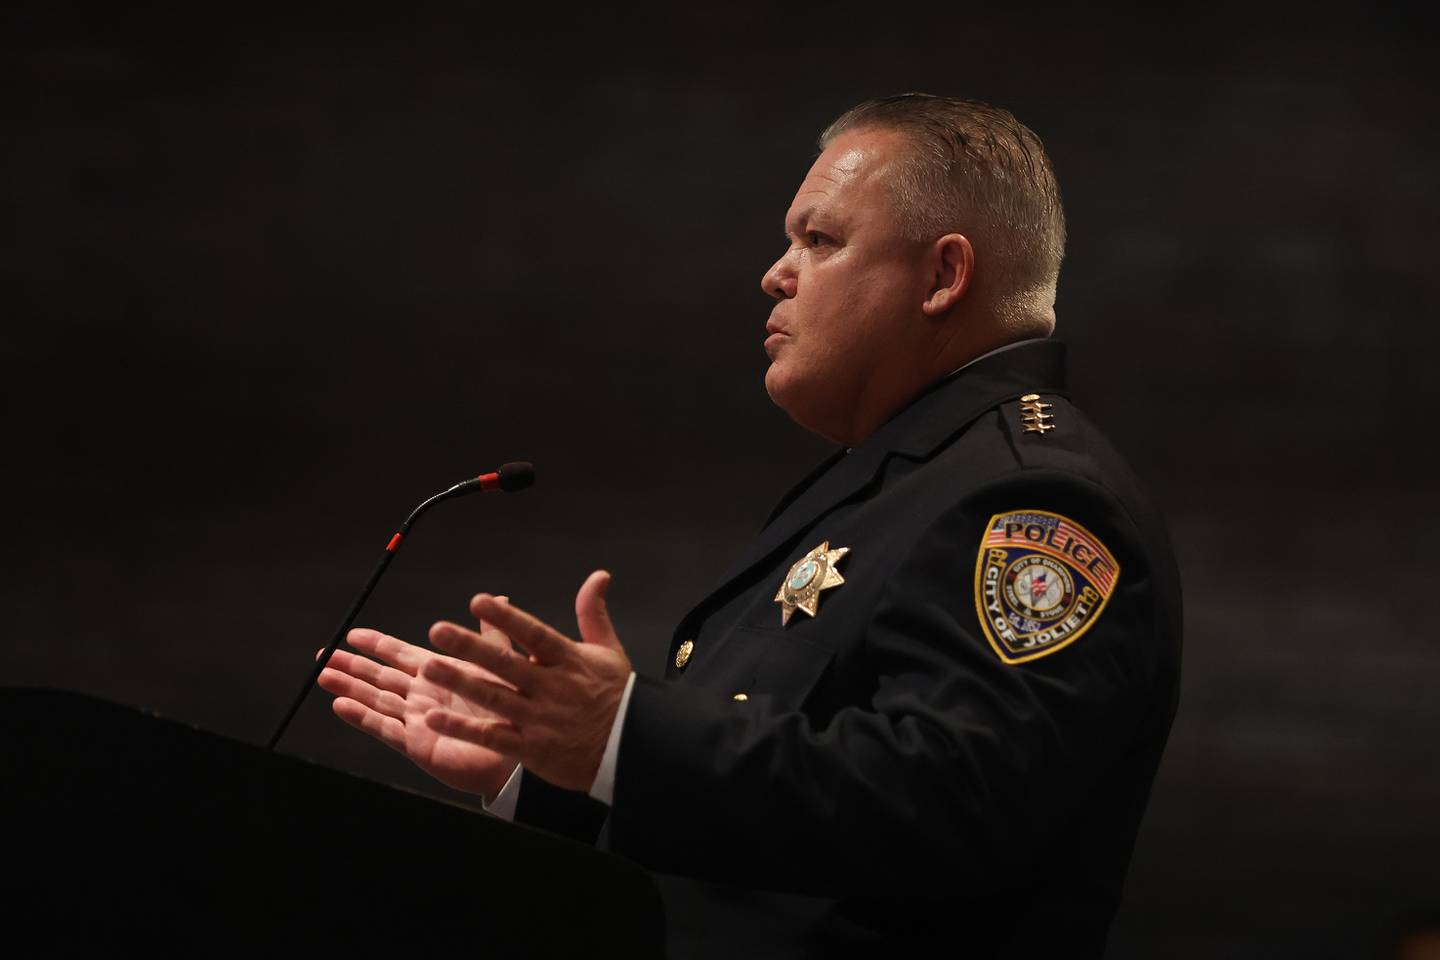 Joliet Police Chief William Evans shares a few words after being officially introduced as the new Joliet Police Chief at the Joliet City Council Meeting. Tuesday, Mar. 1, 2022, in Joliet.